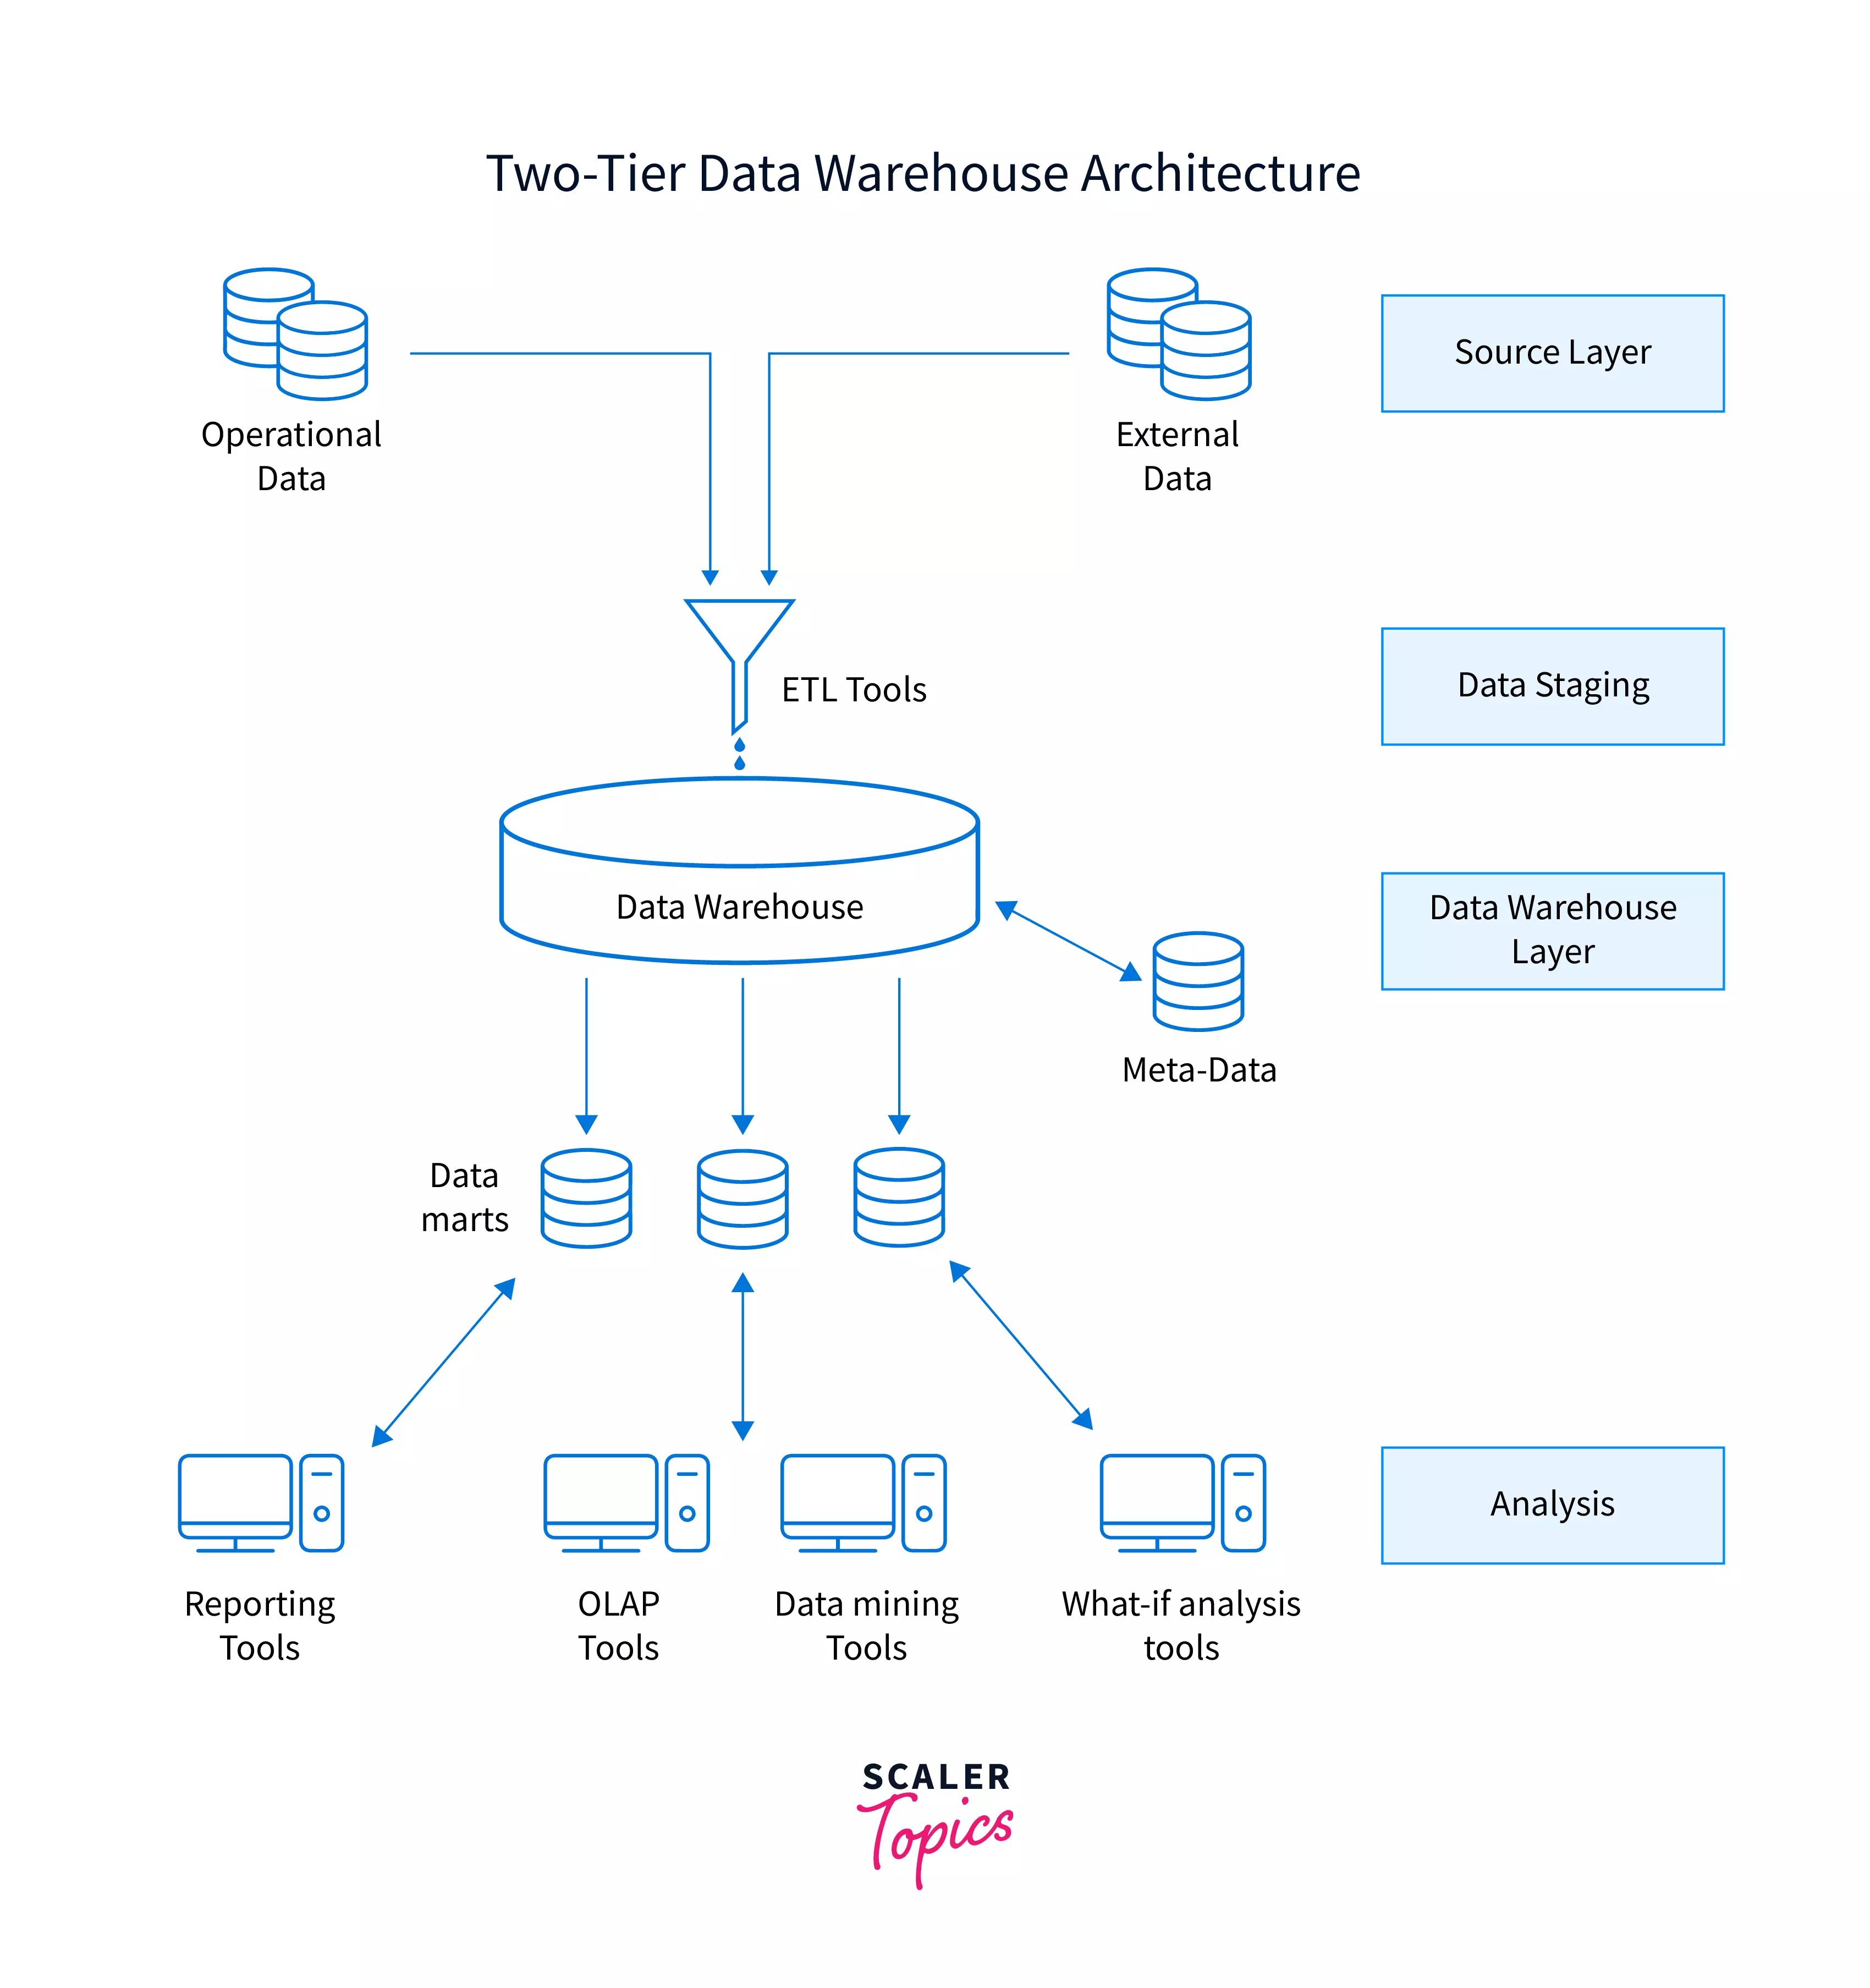 https://scaler.com/topics/images/architecture-of-data-warehoue-image-two-tier-data-warehouse.webp